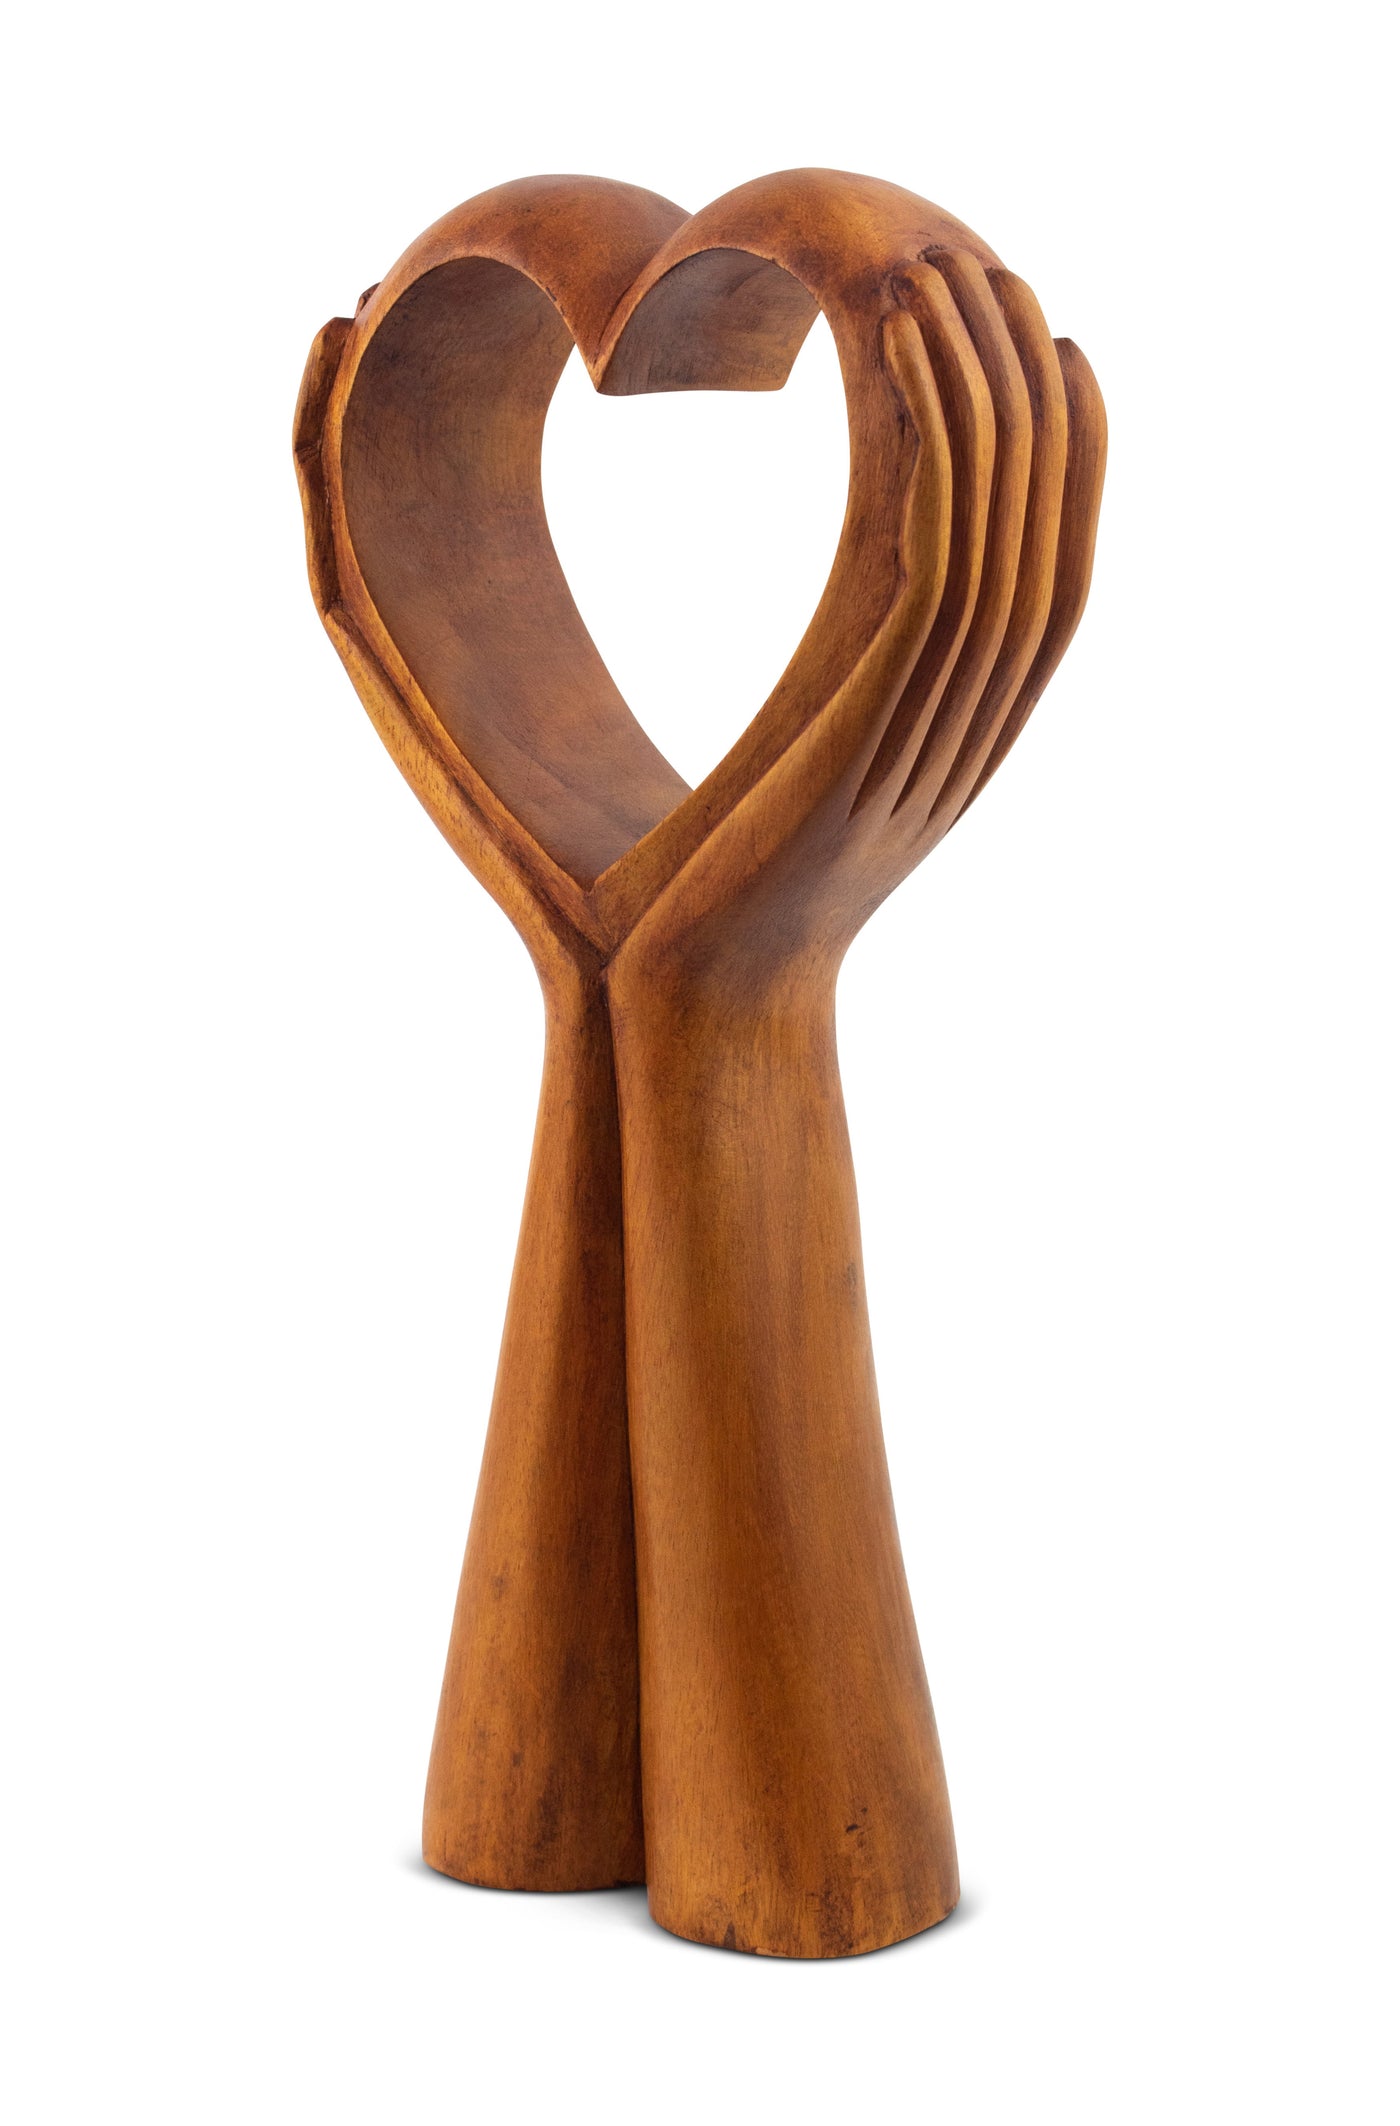 12" Wooden Handmade Abstract Sculpture Statue Handcrafted "Heart in Hand" Gift Decorative Home Decor Figurine Accent Decoration Artwork Hand Carved